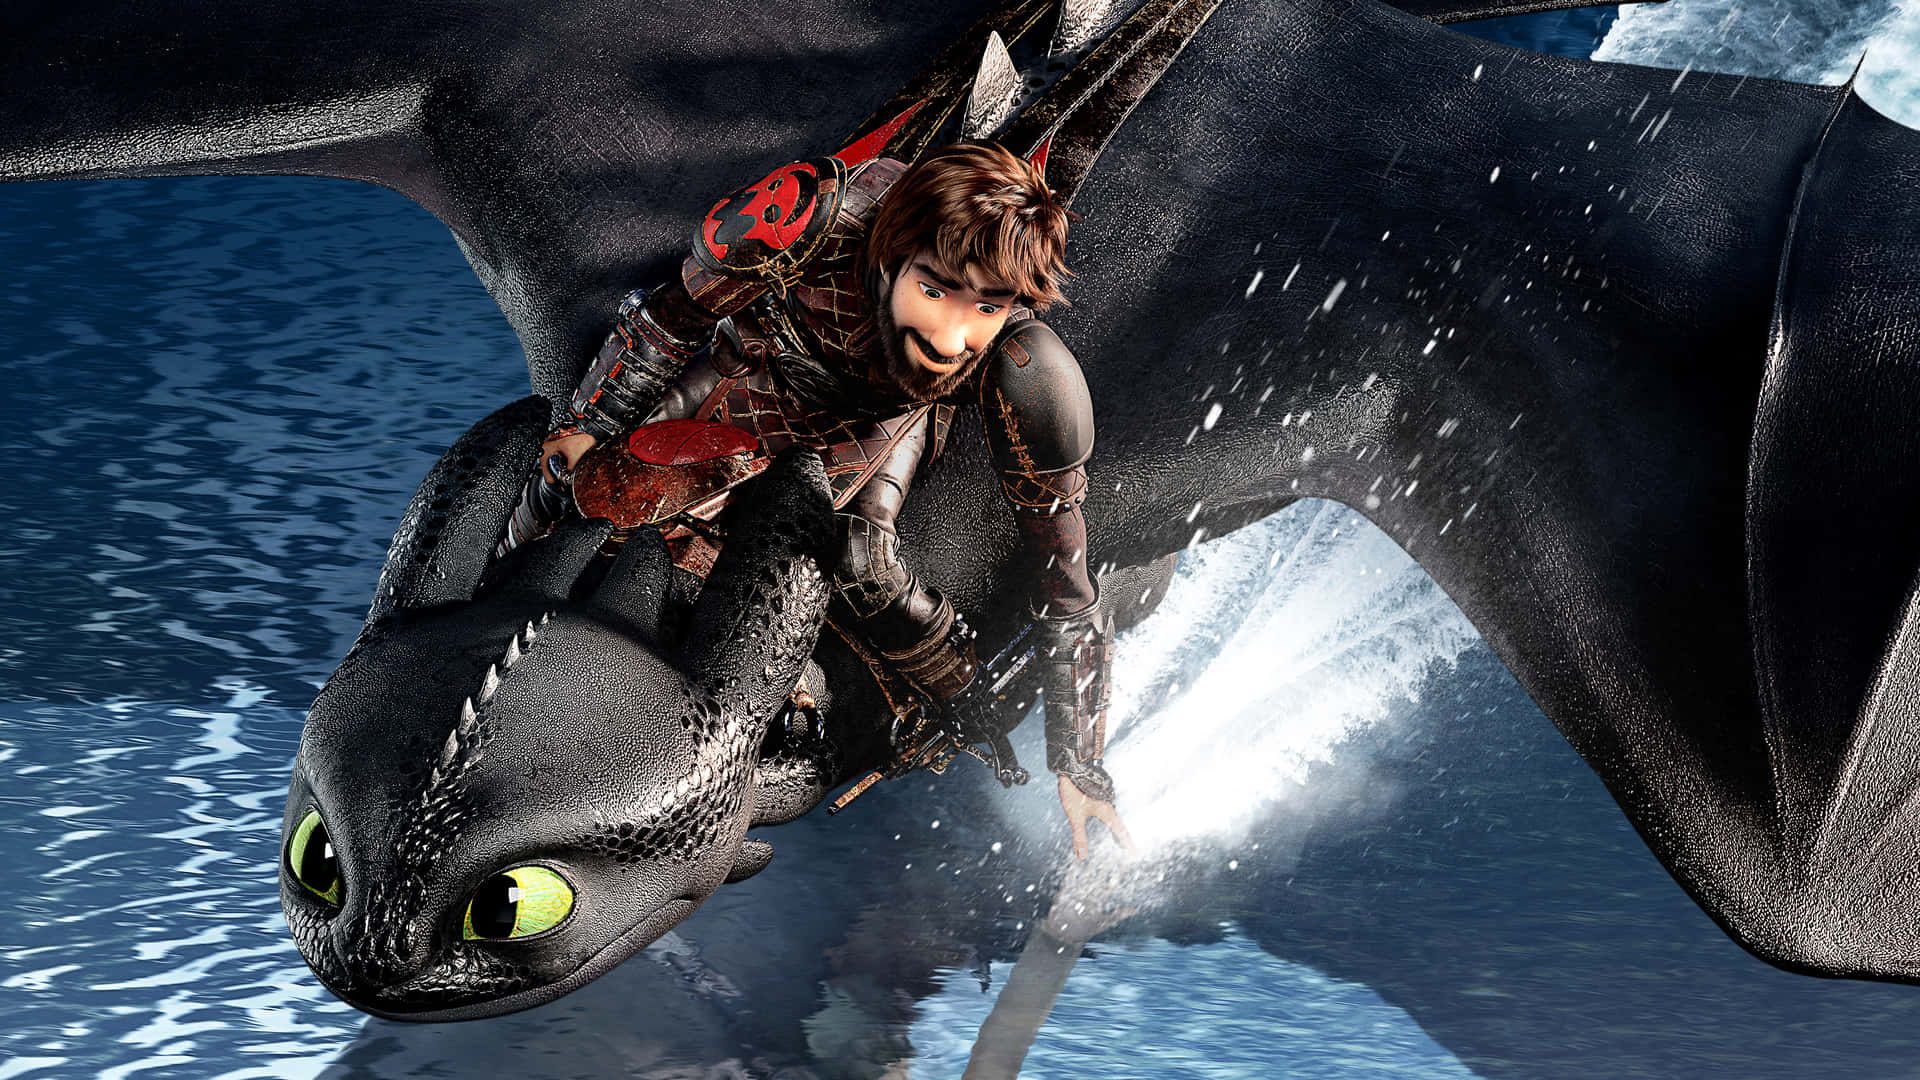 How To Train Your Dragon The Hidden World Wallpaper